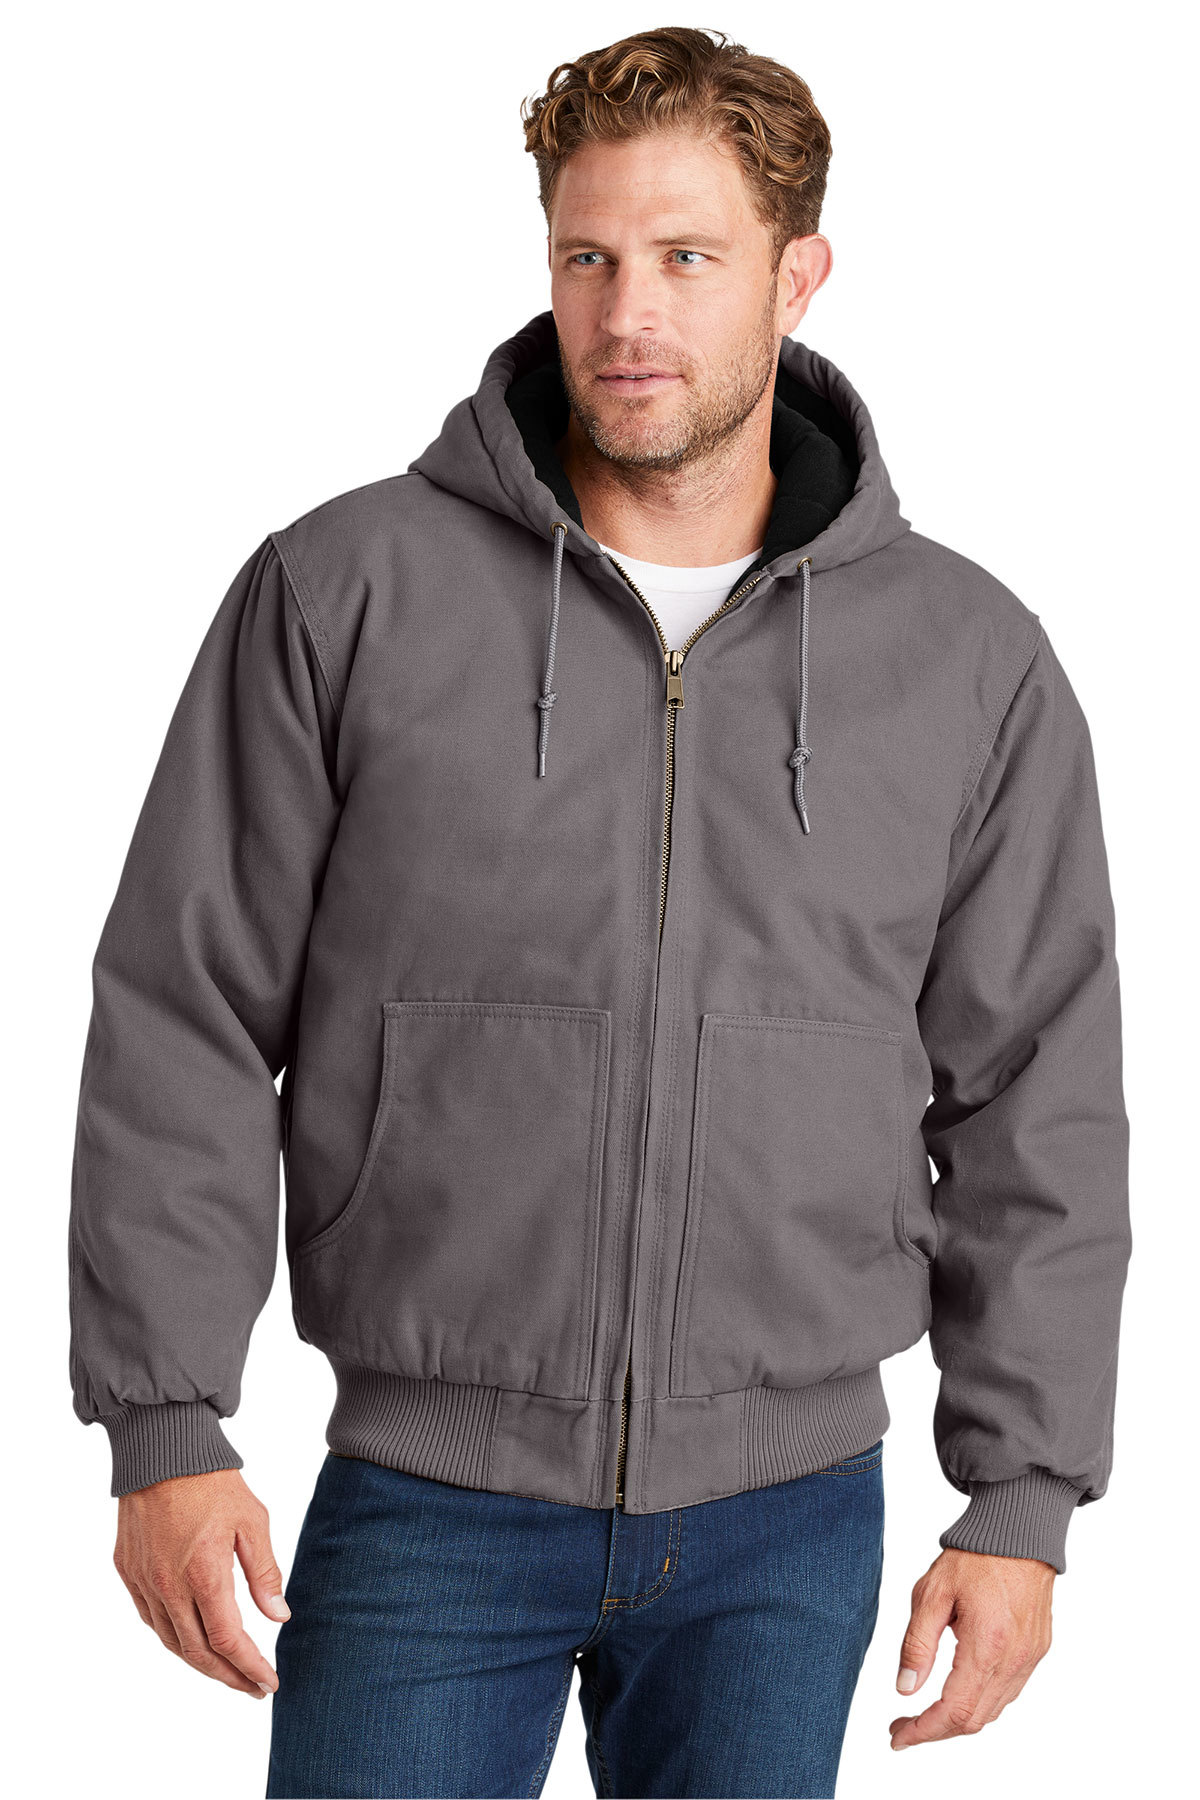 CornerStone Washed Duck Cloth Insulated Hooded Work Jacket | Product ...